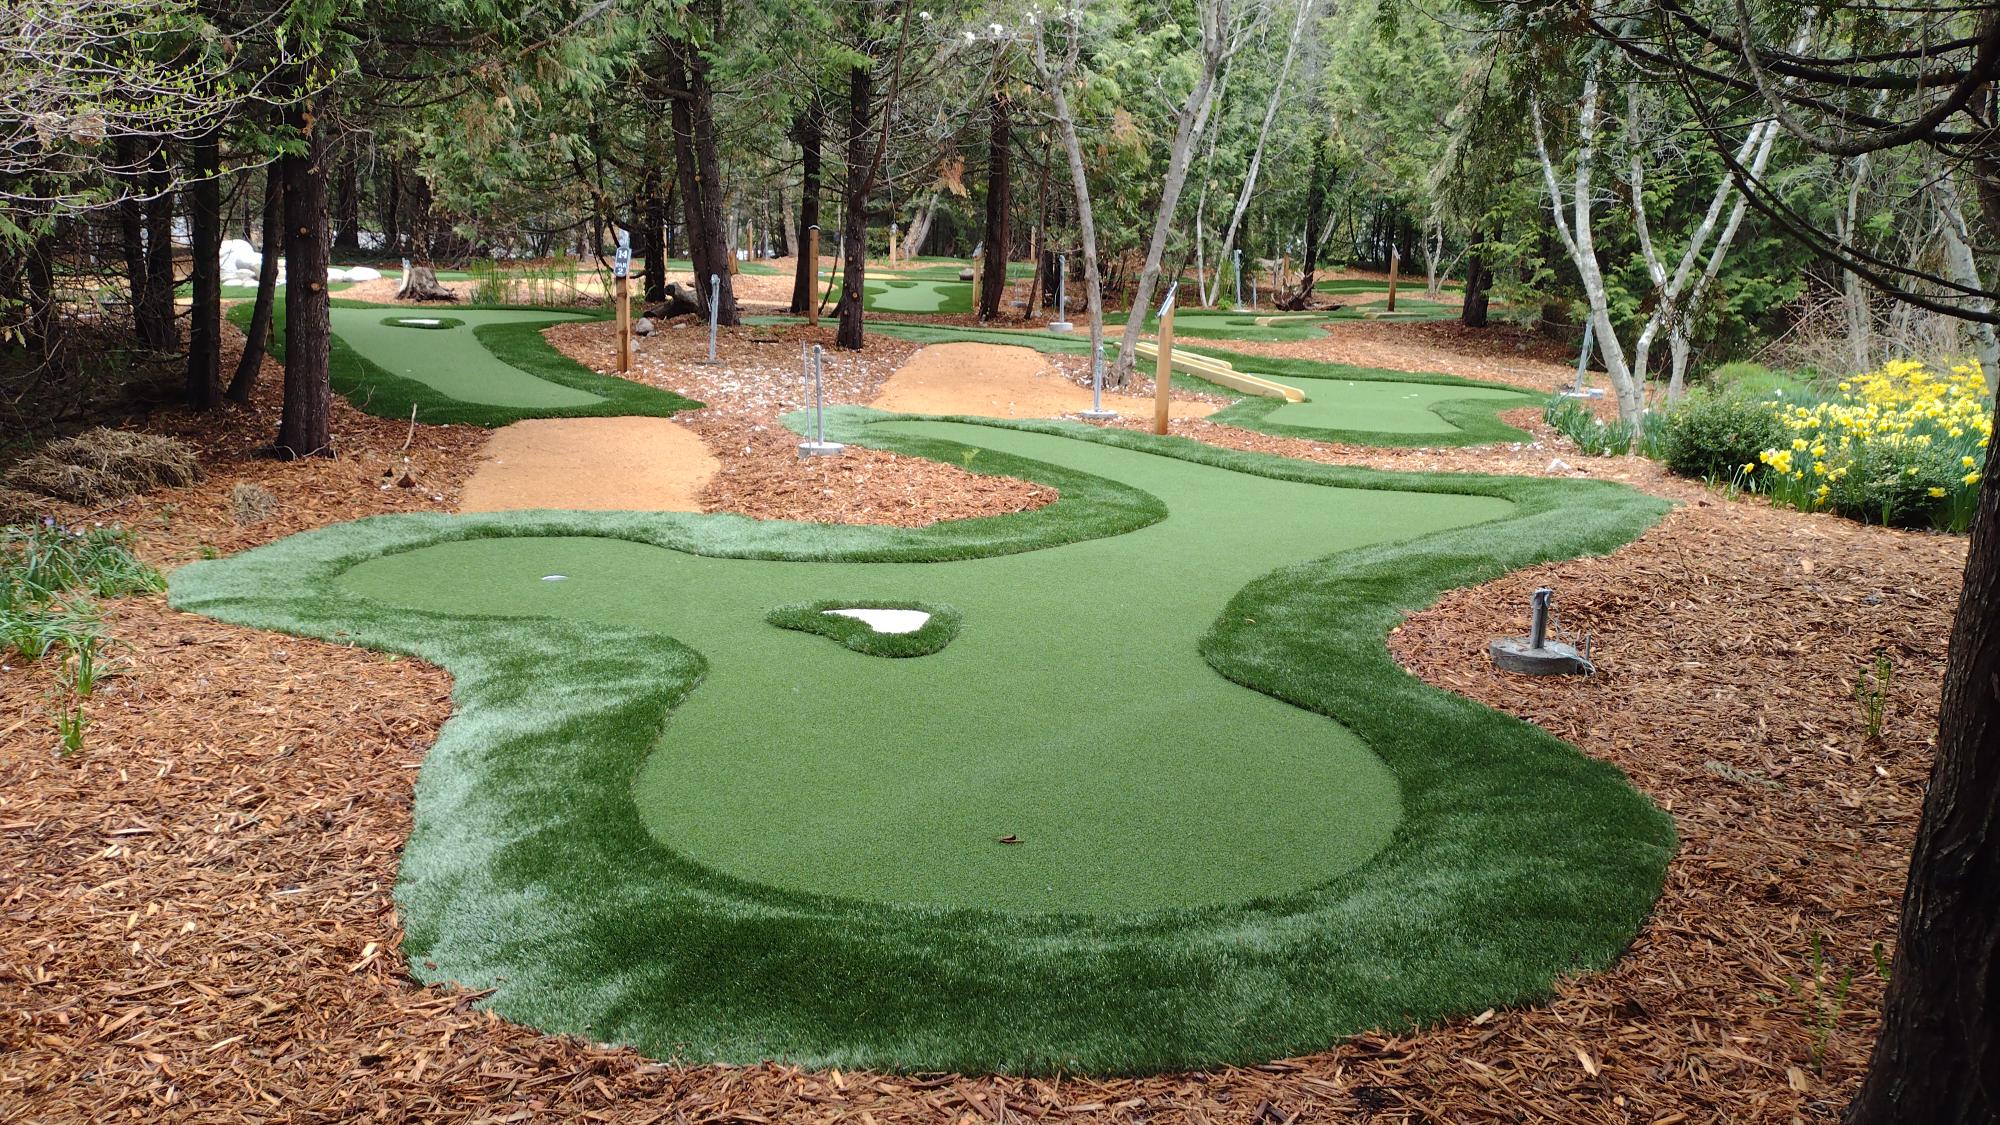 Grand Hotel mini golf winds through woodlands with sand traps and rough turf like regular golf